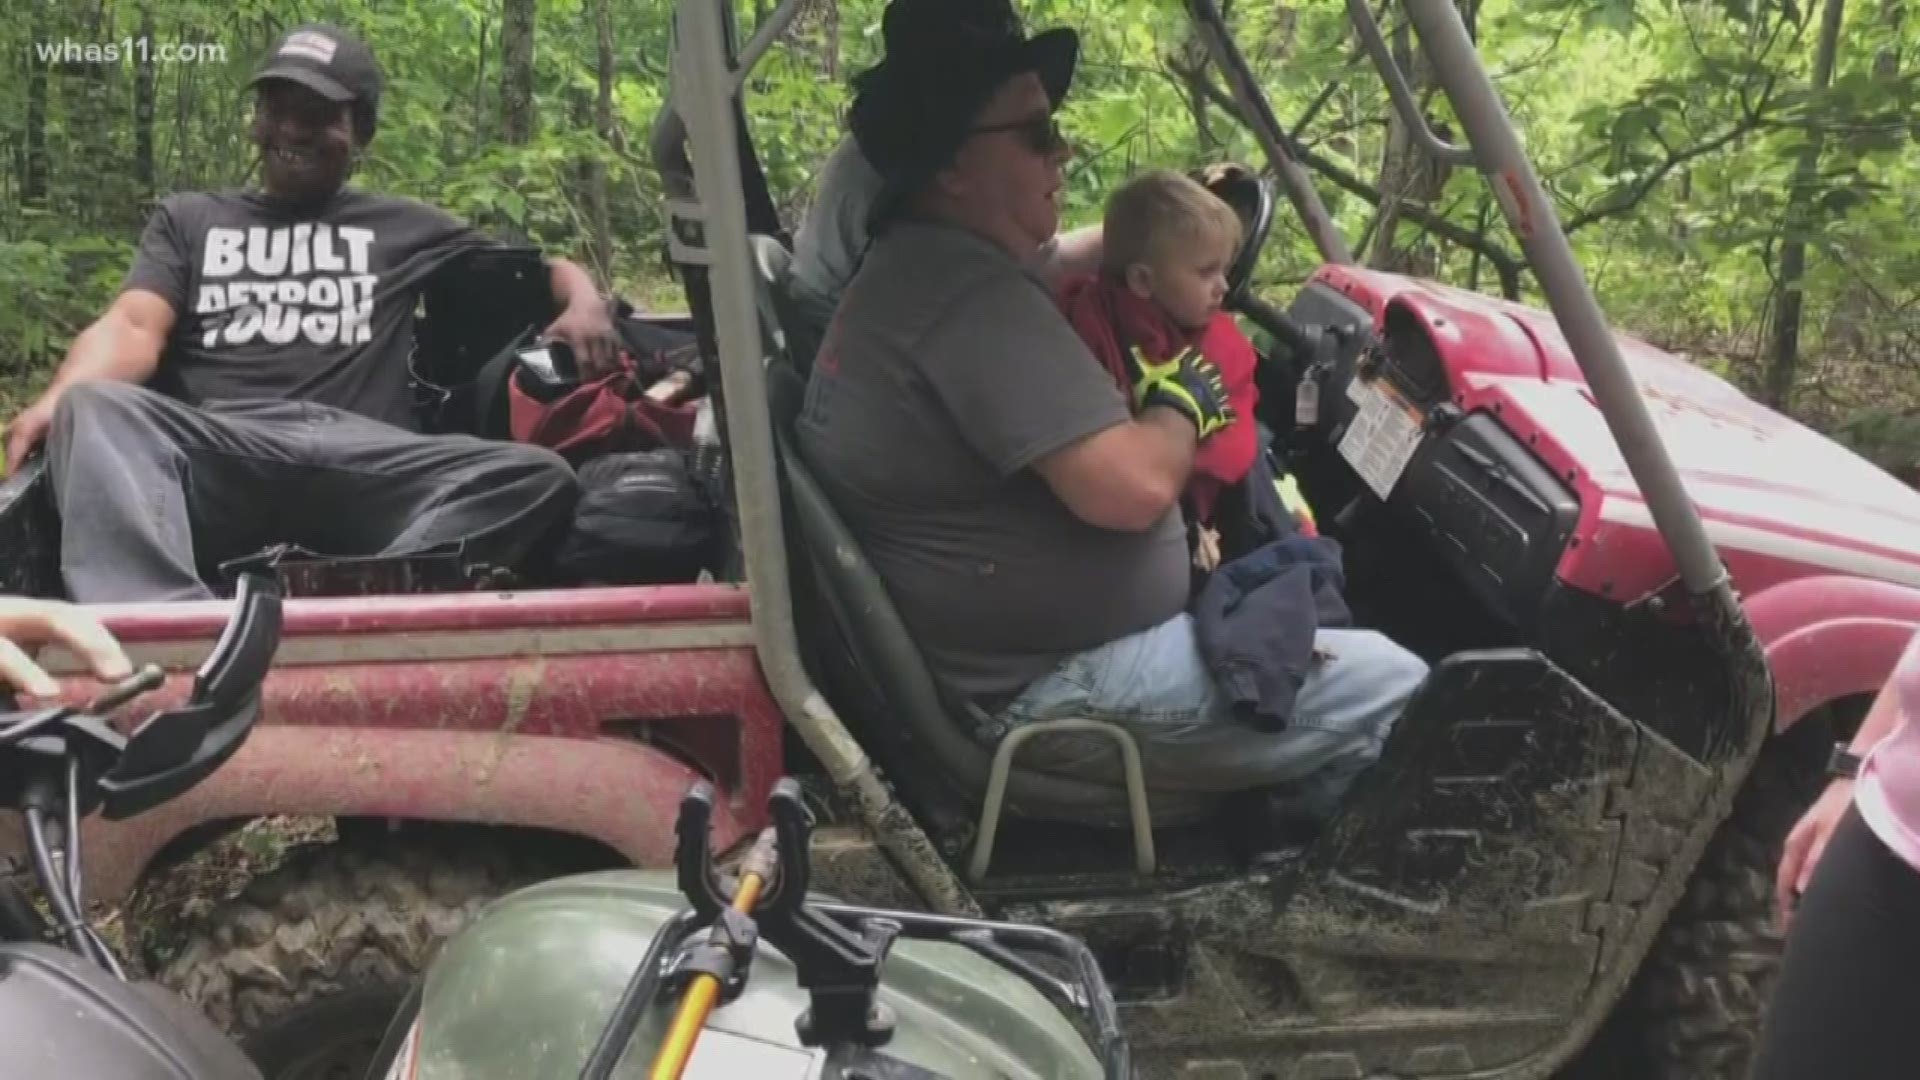 Kenneth Howard went missing from his home in Magoffin County on Sunday. After a tireless search in the woods near his home, the toddler was found alive.